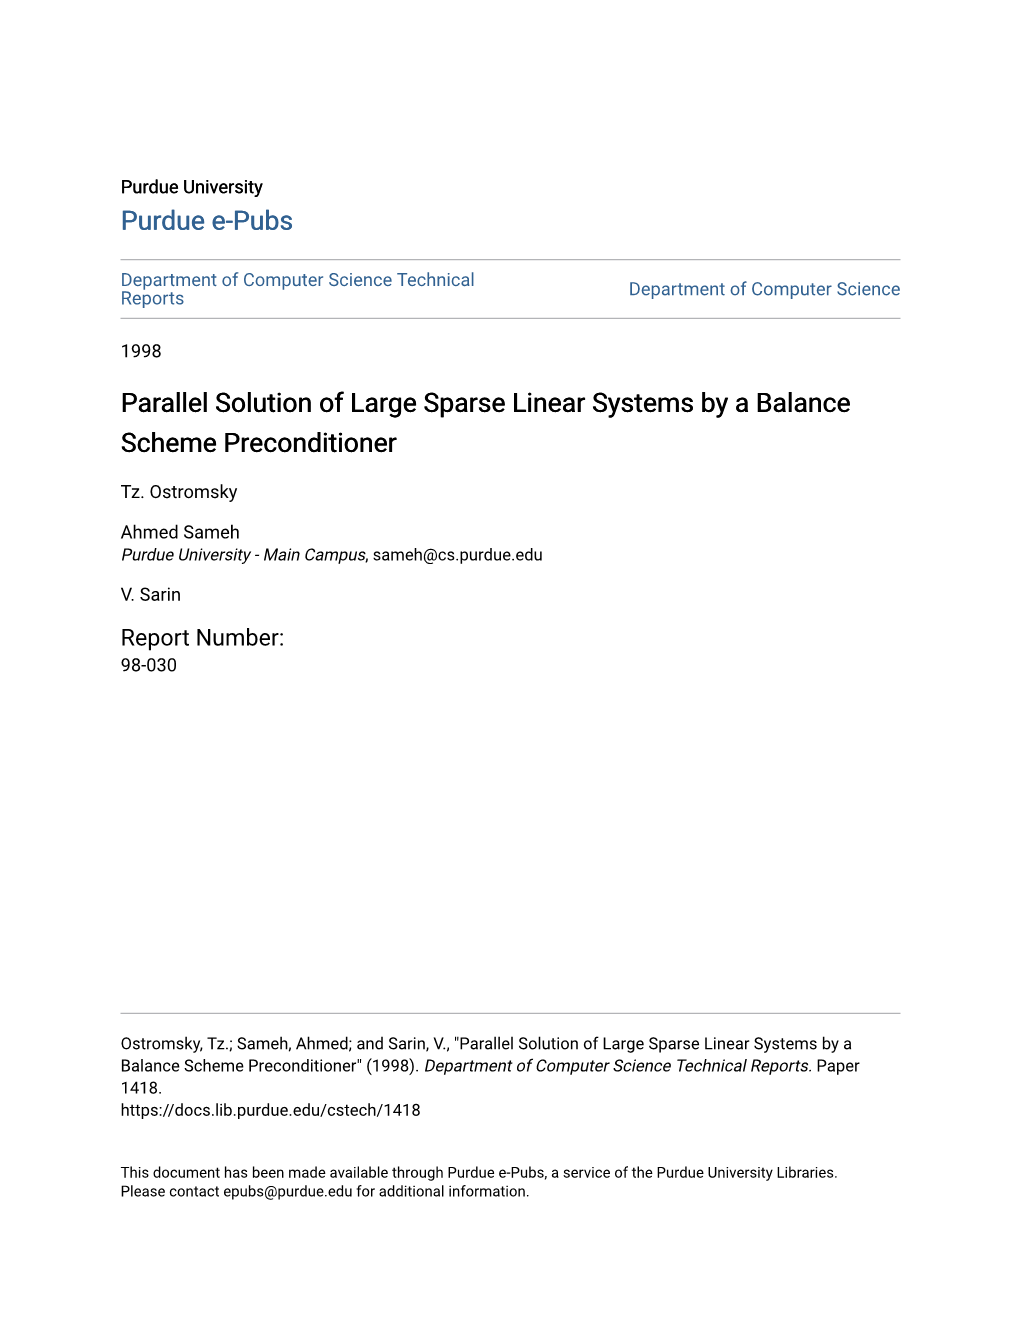 Parallel Solution of Large Sparse Linear Systems by a Balance Scheme Preconditioner